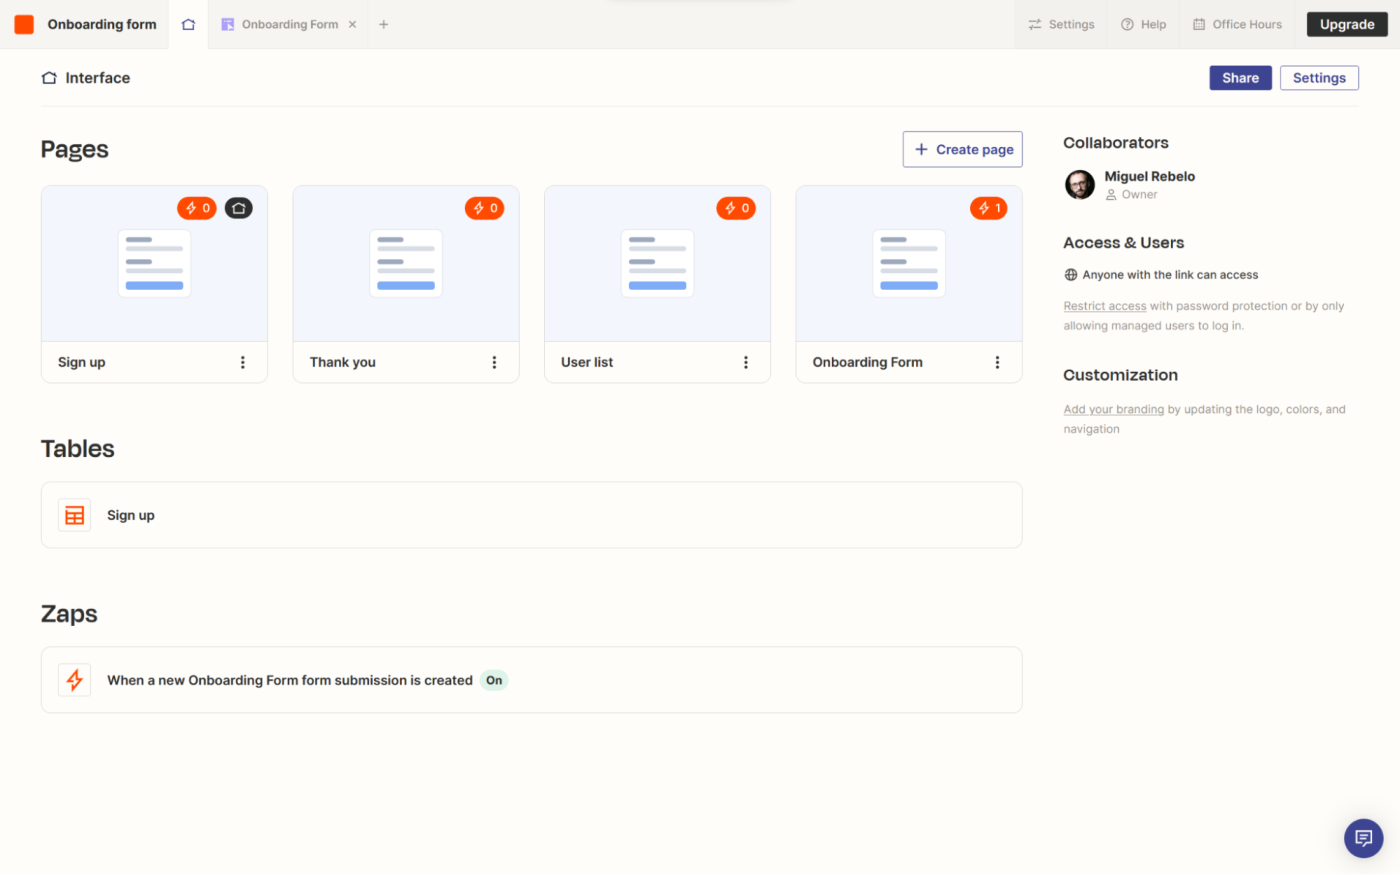 Zapier, our pick for the best internal tool builder for automation